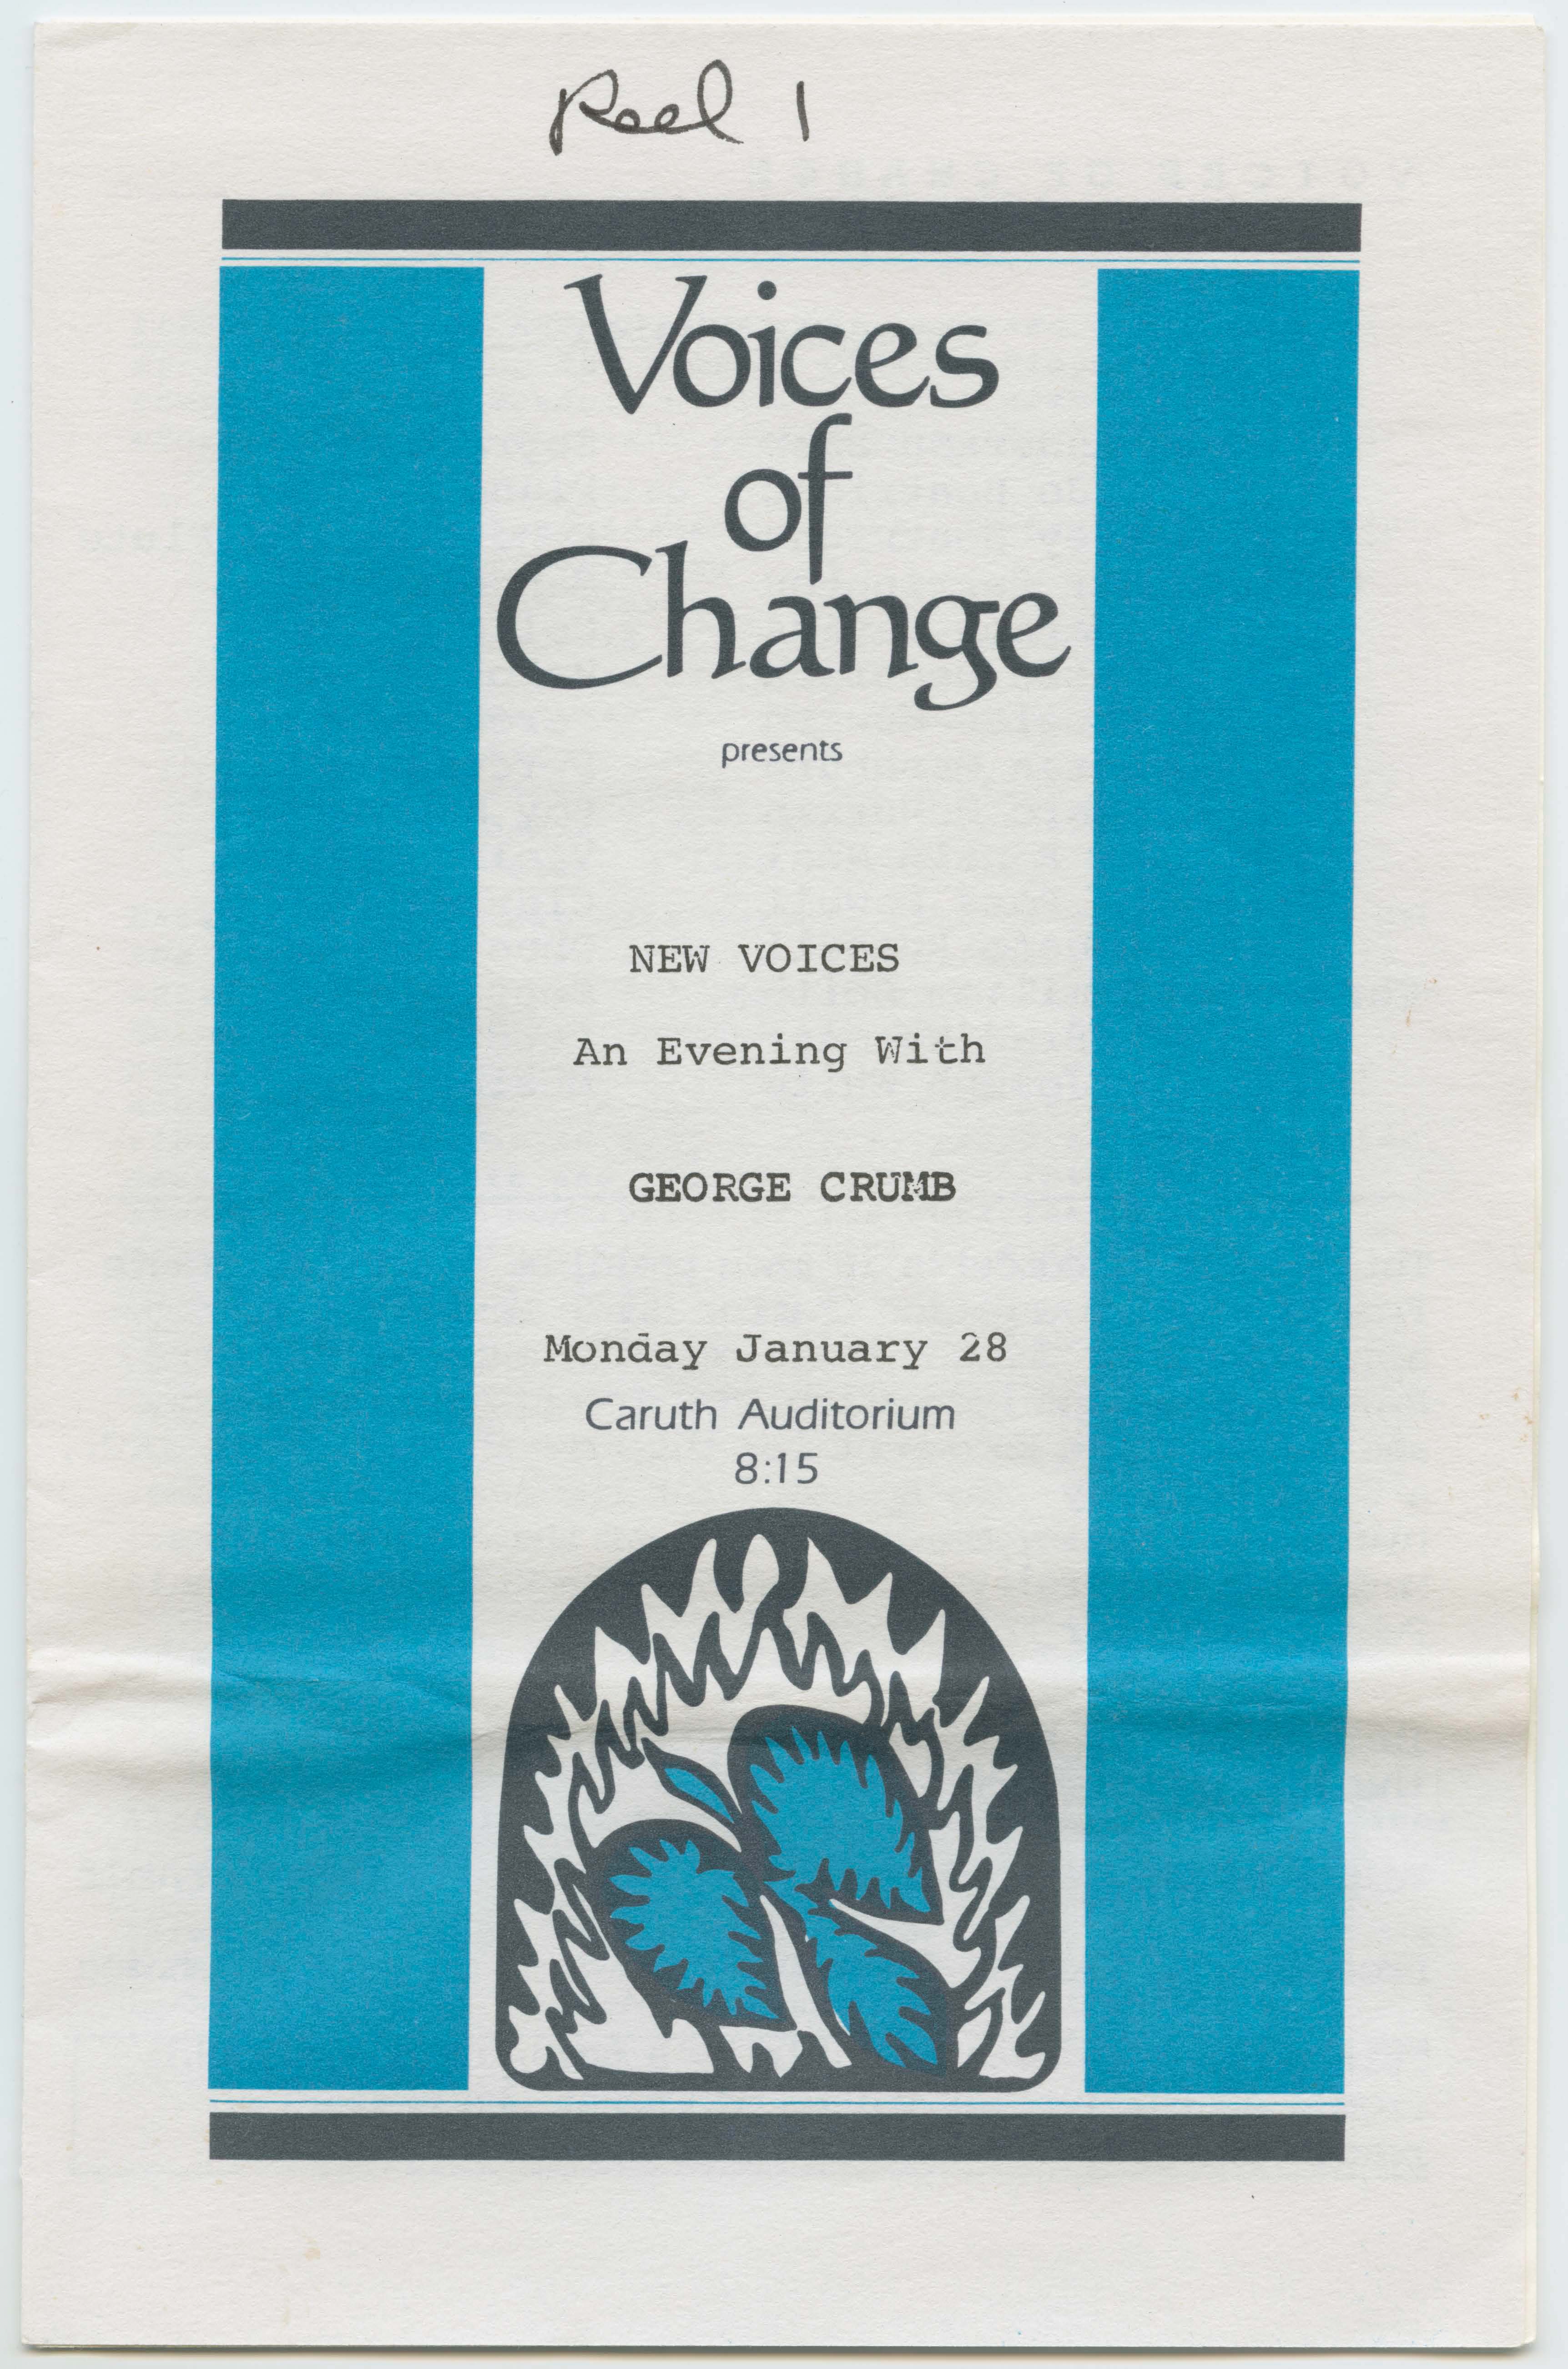 title="New voices: an evening with George Crumb : January 28, 1980 program"